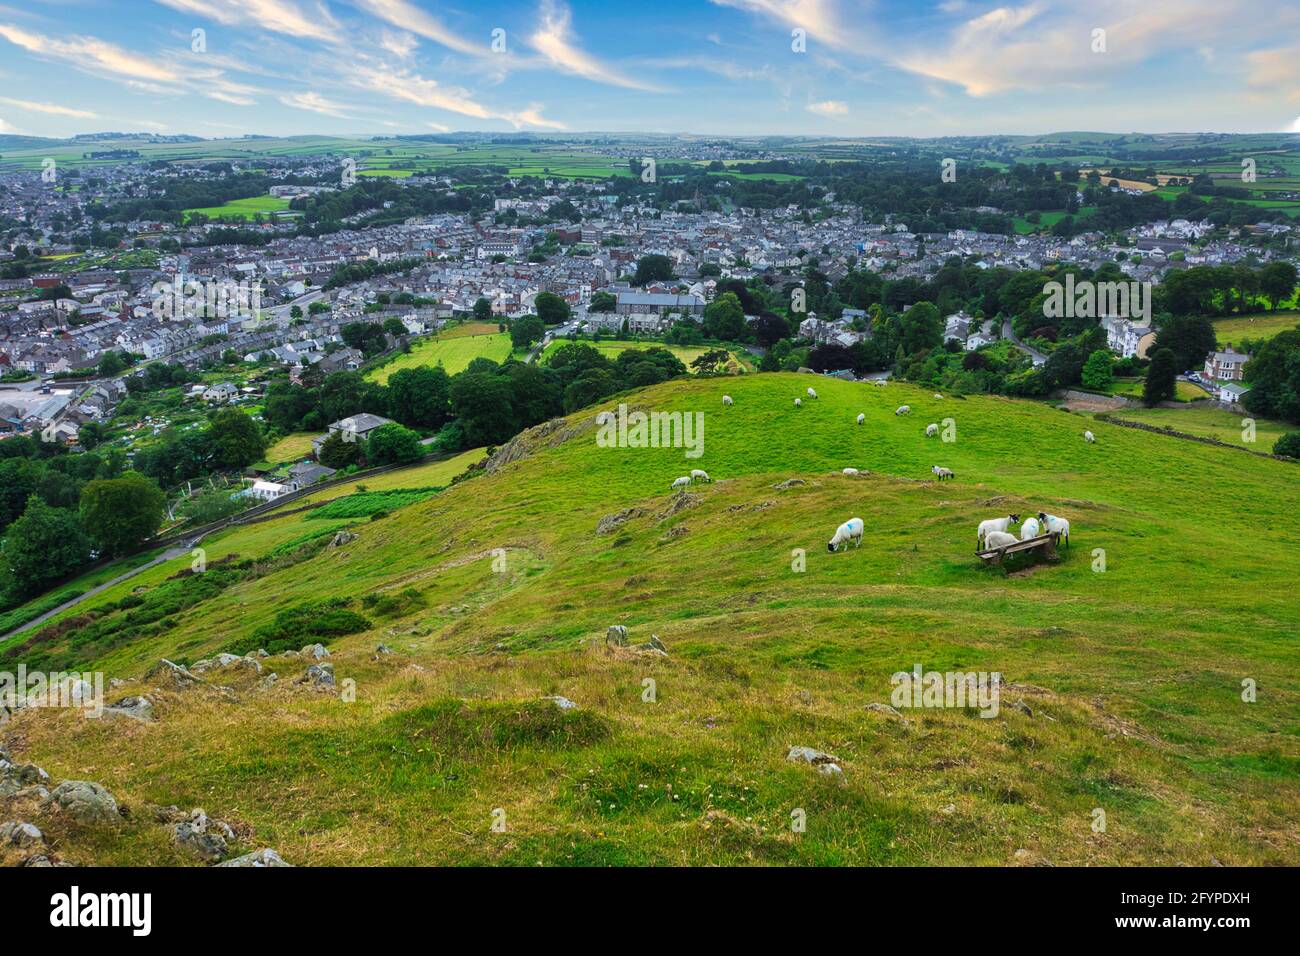 A view of Ulverston from the Hoad Monument, South Lakeland district of Cumbria, England. Stock Photo